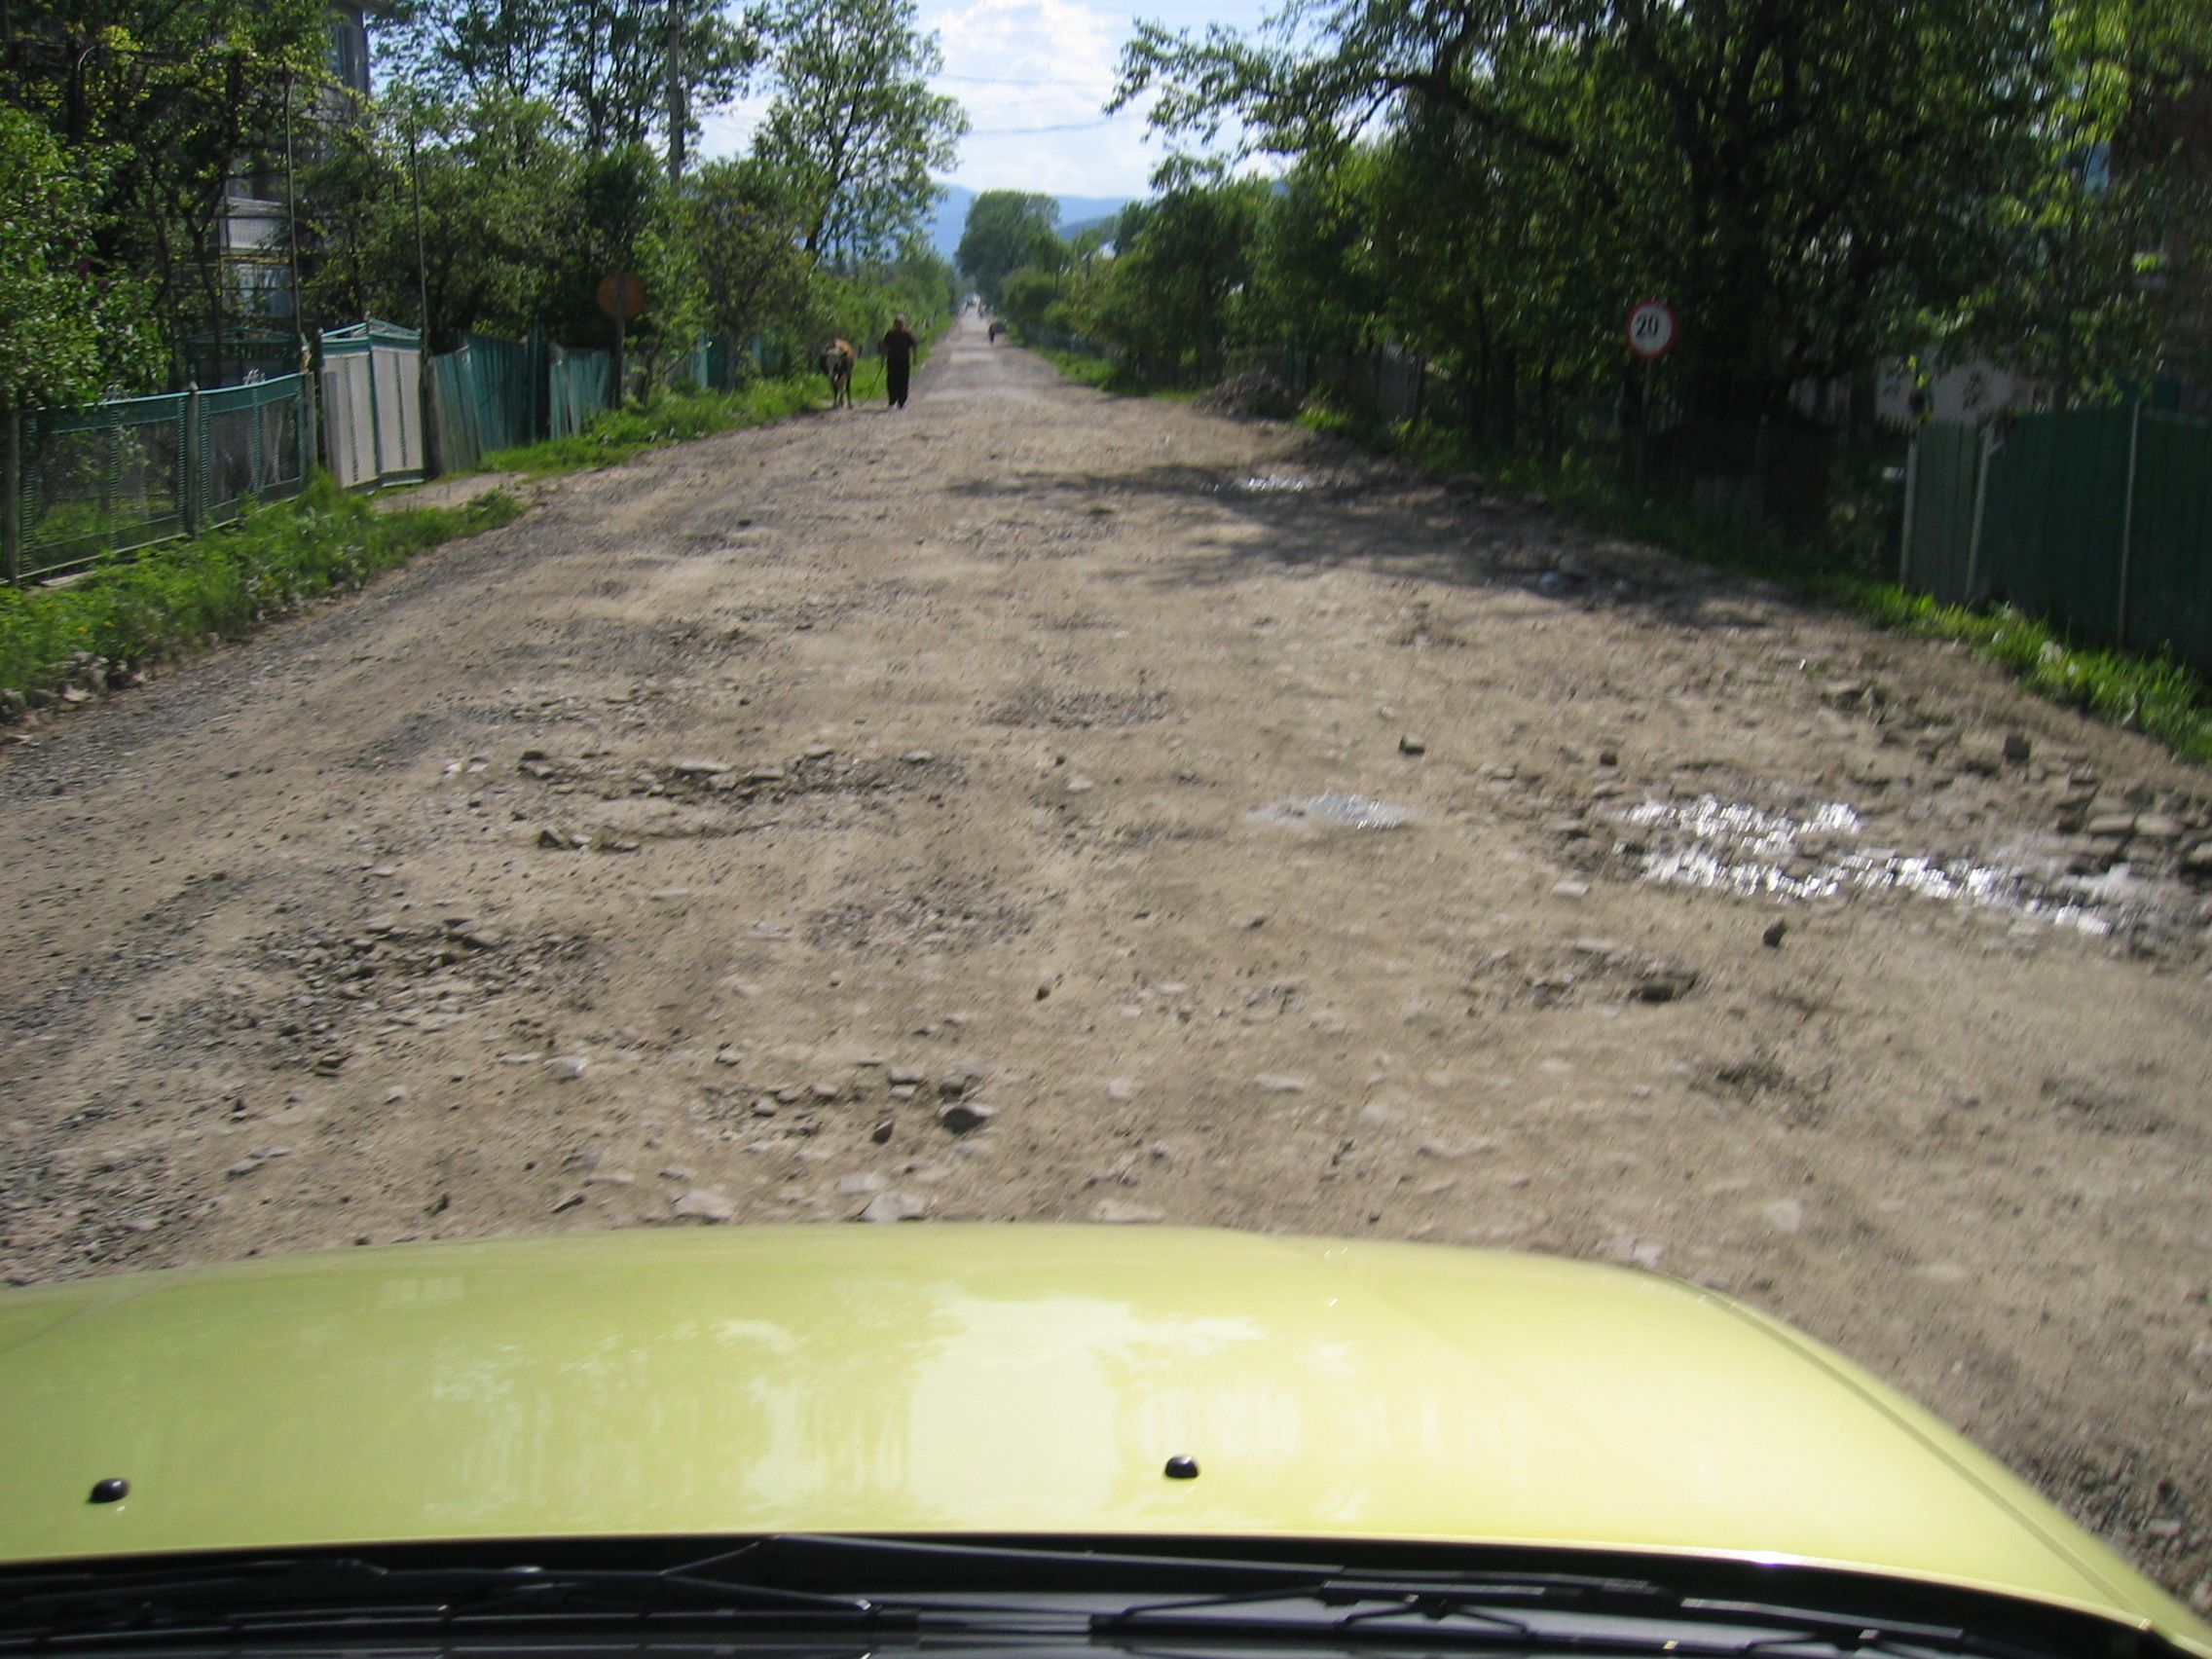 The road to Solotwina